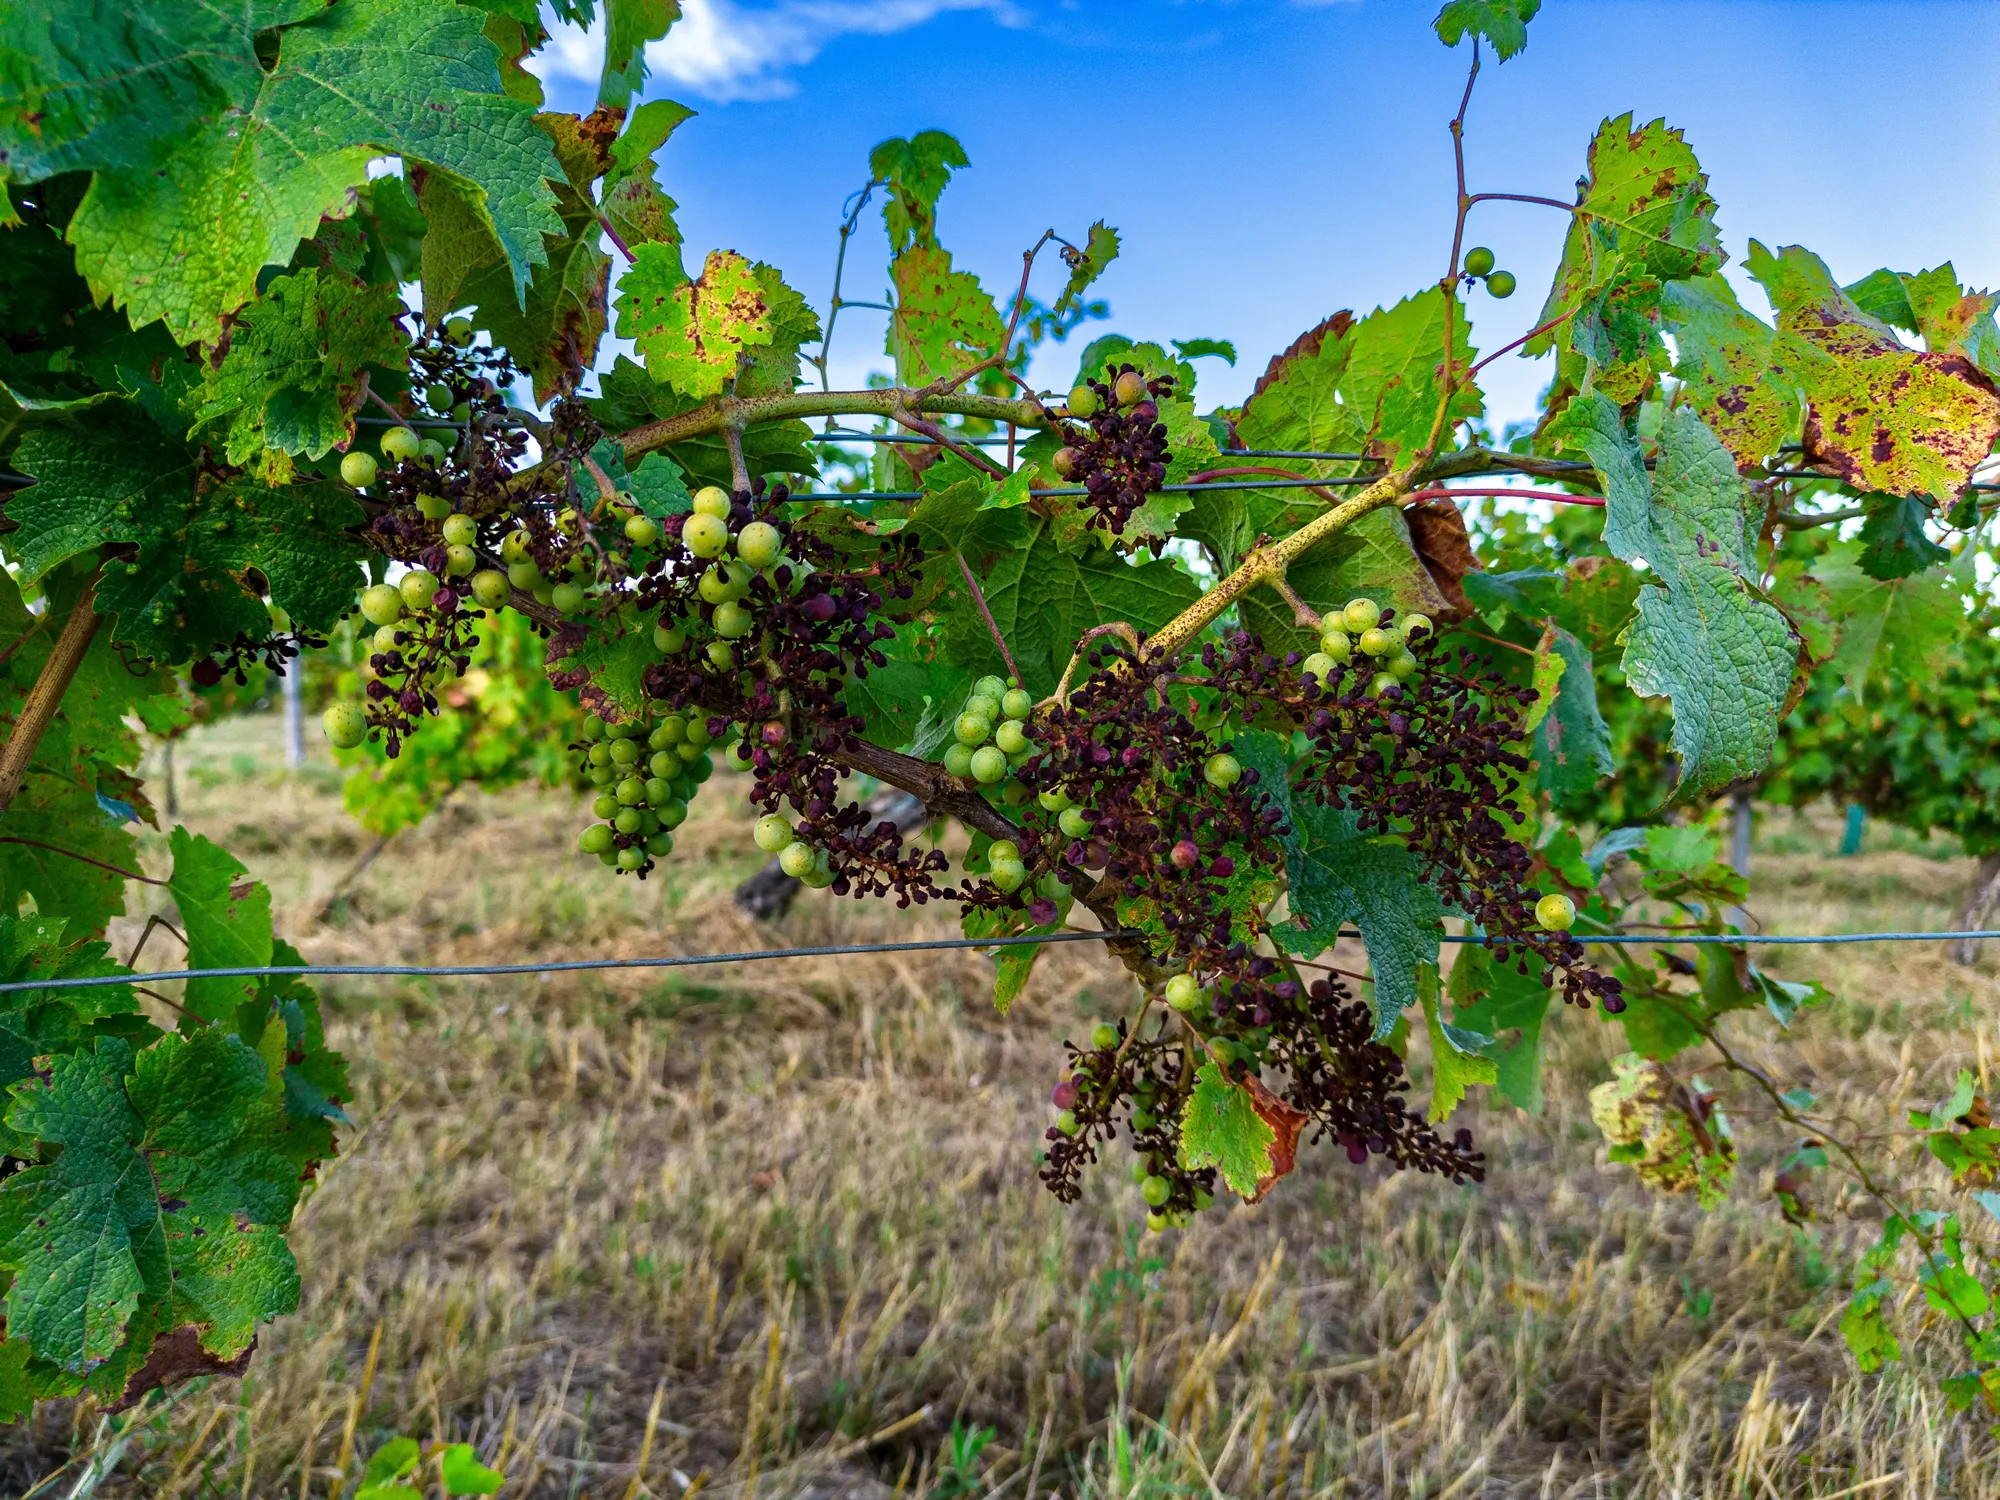 FRANCE, GIRONDE, TARGON, ATTACK OF DOWNY MILDEW ON AN OLD VINE IN THE SUMMER OF 2023